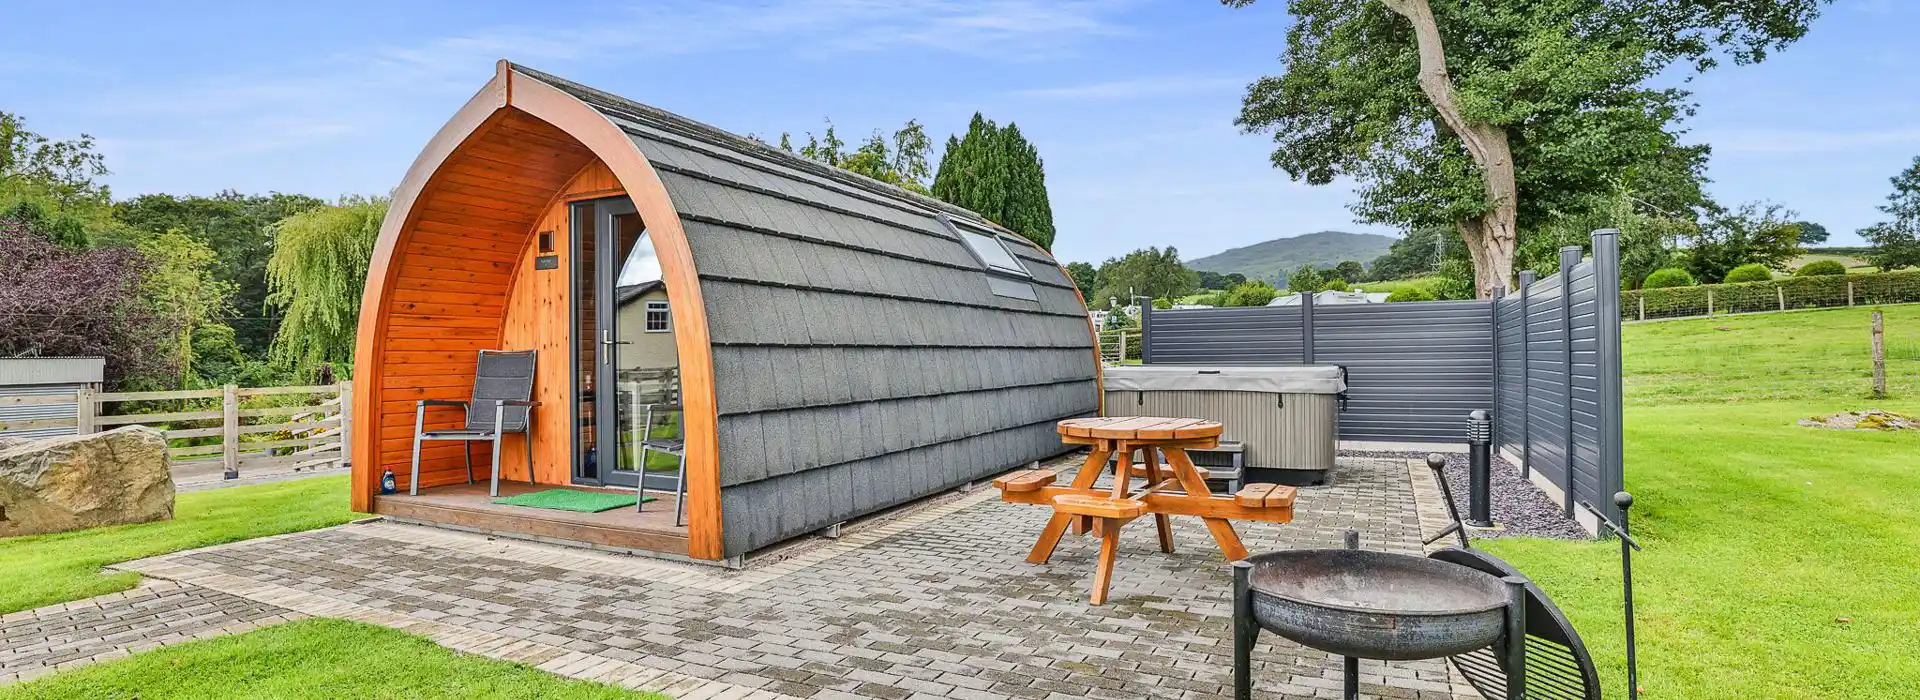 Betws-y-Coed camping and glamping pods